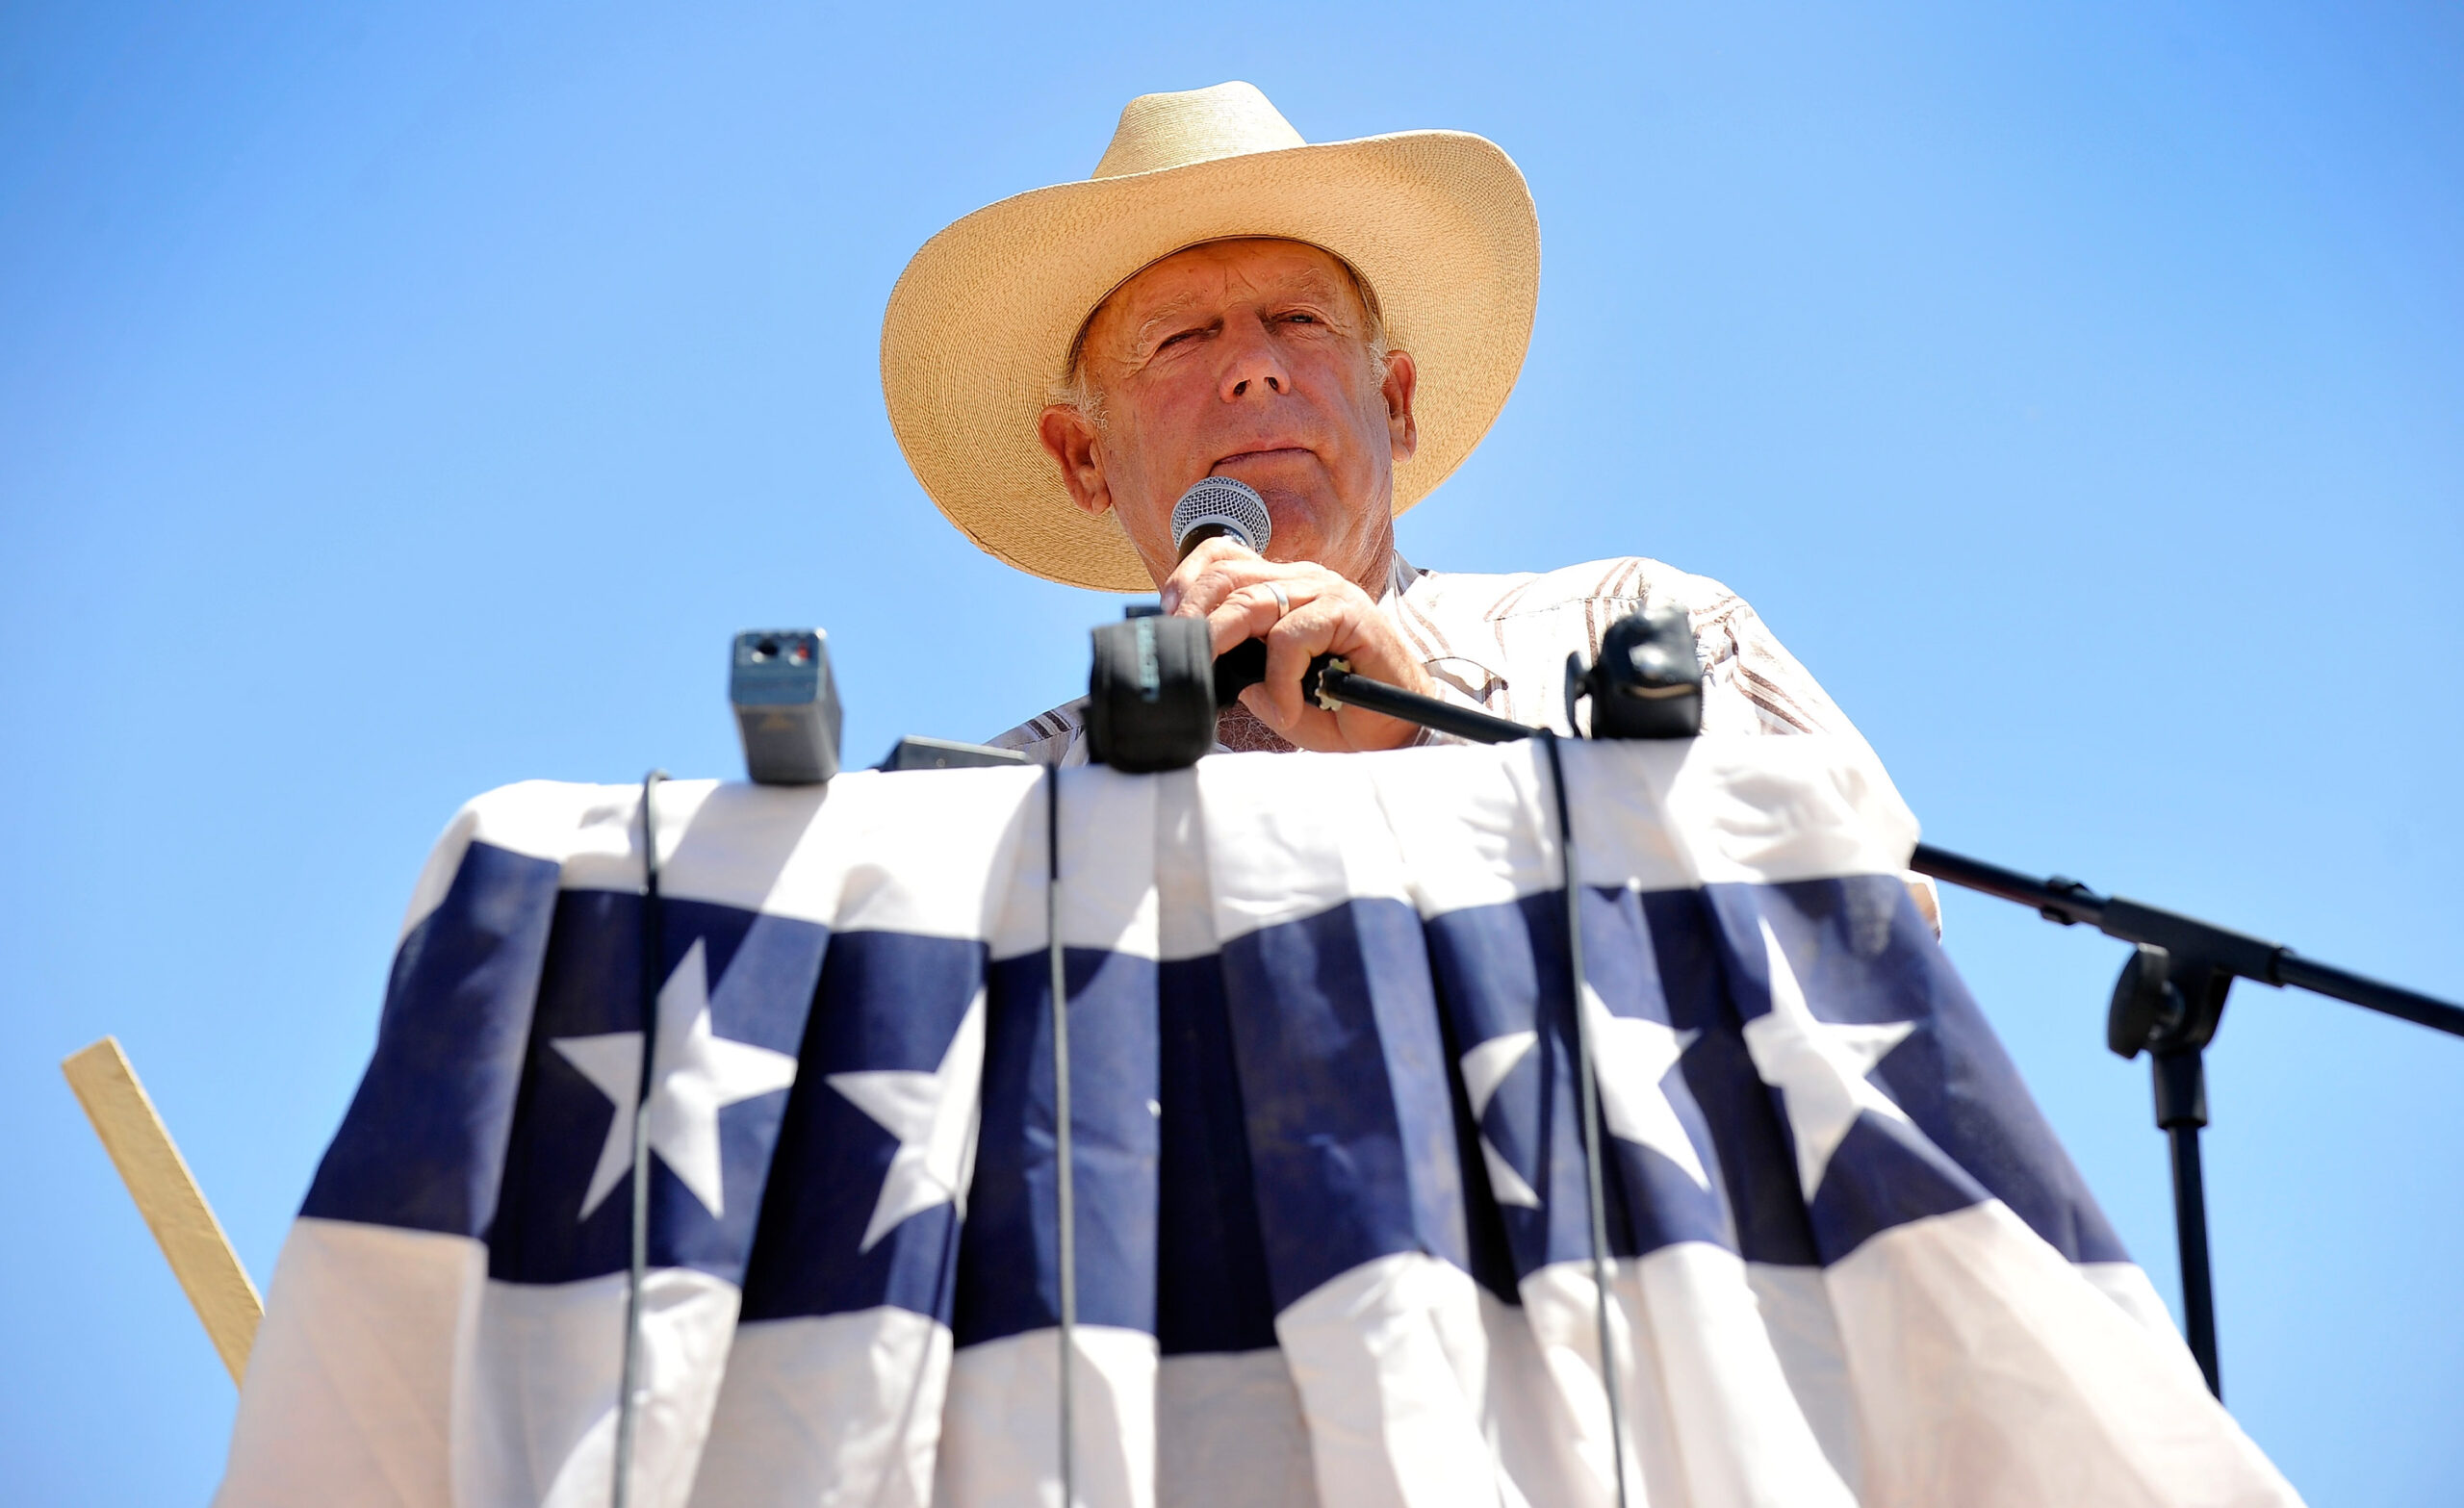 Cliven Bundy, Donald Sterling and Affirmative Action